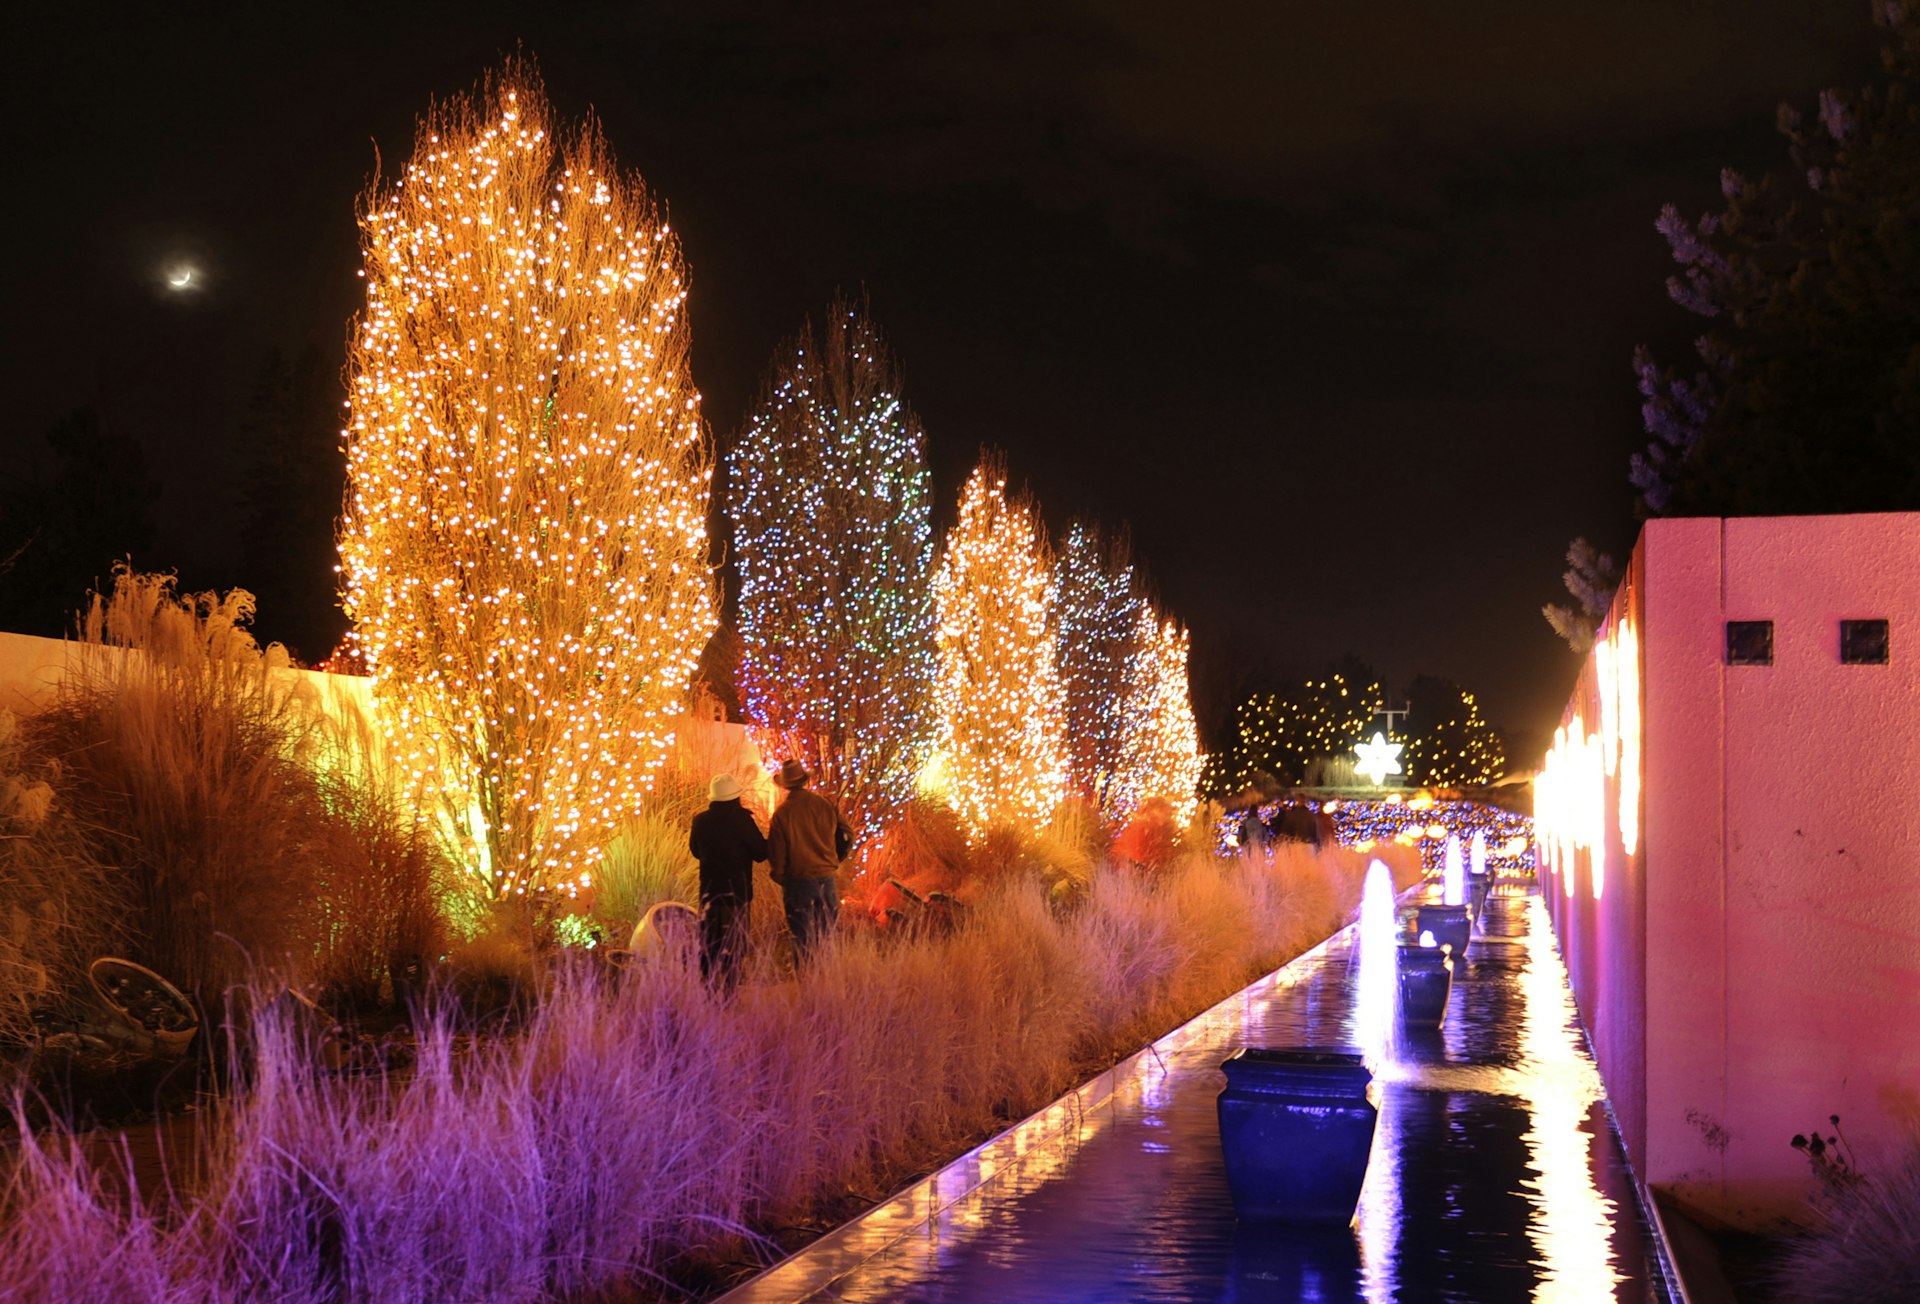 The Denver Botanic Garden's holiday light display called the Blossoms of Light were on display Thursday night, December 9, 2010. More than one million colorful lights adorn the botanic garden's winter beauty. The gardens, located at 1007 York Street, are